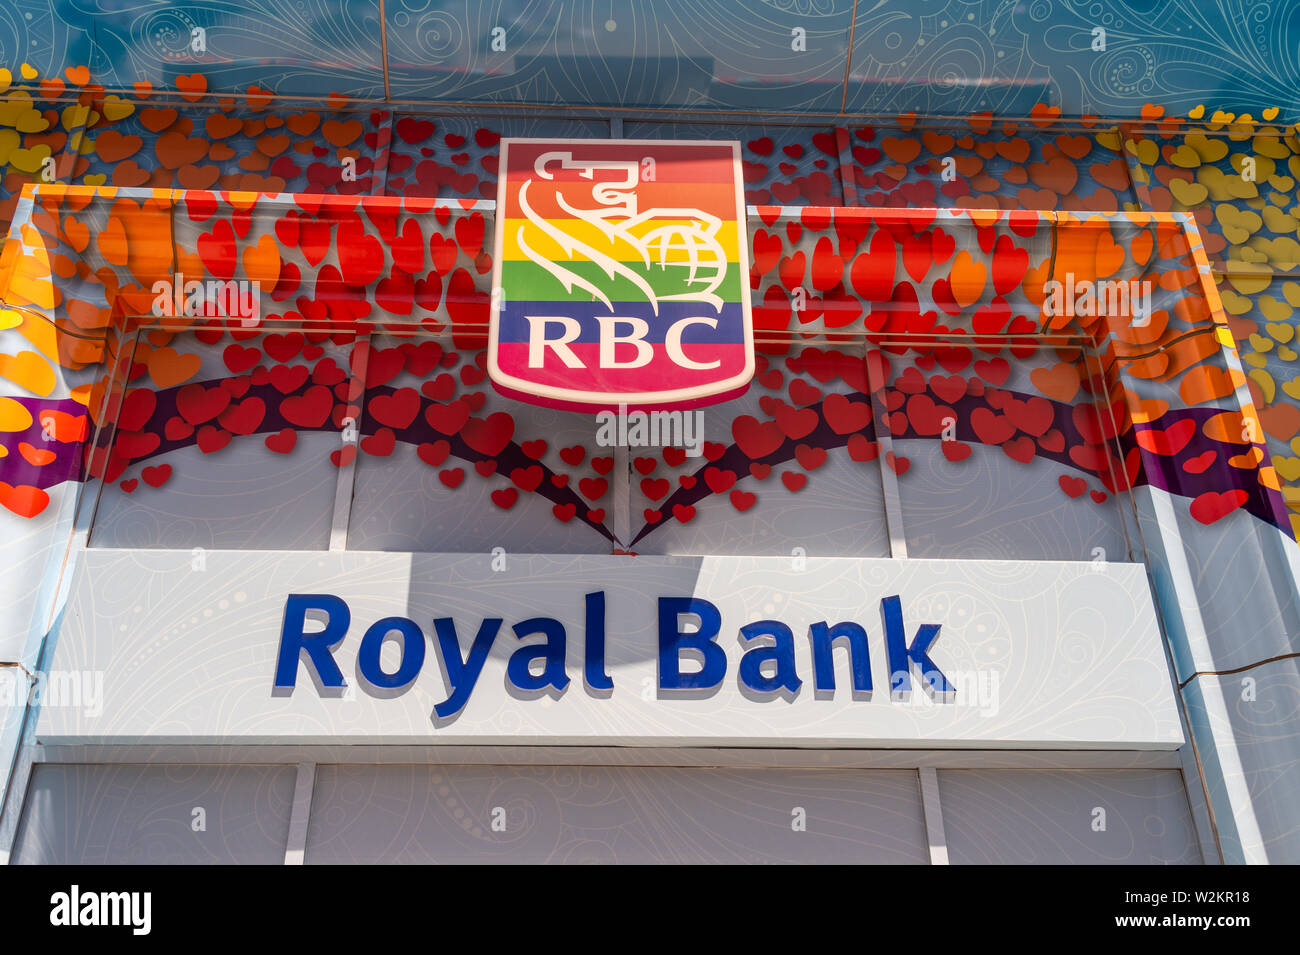 Toronto, CA - 23 June 2019: Royal Bank of Canada facade displays the rainbow colors to celebrate pride month in Toronto, Canada Stock Photo